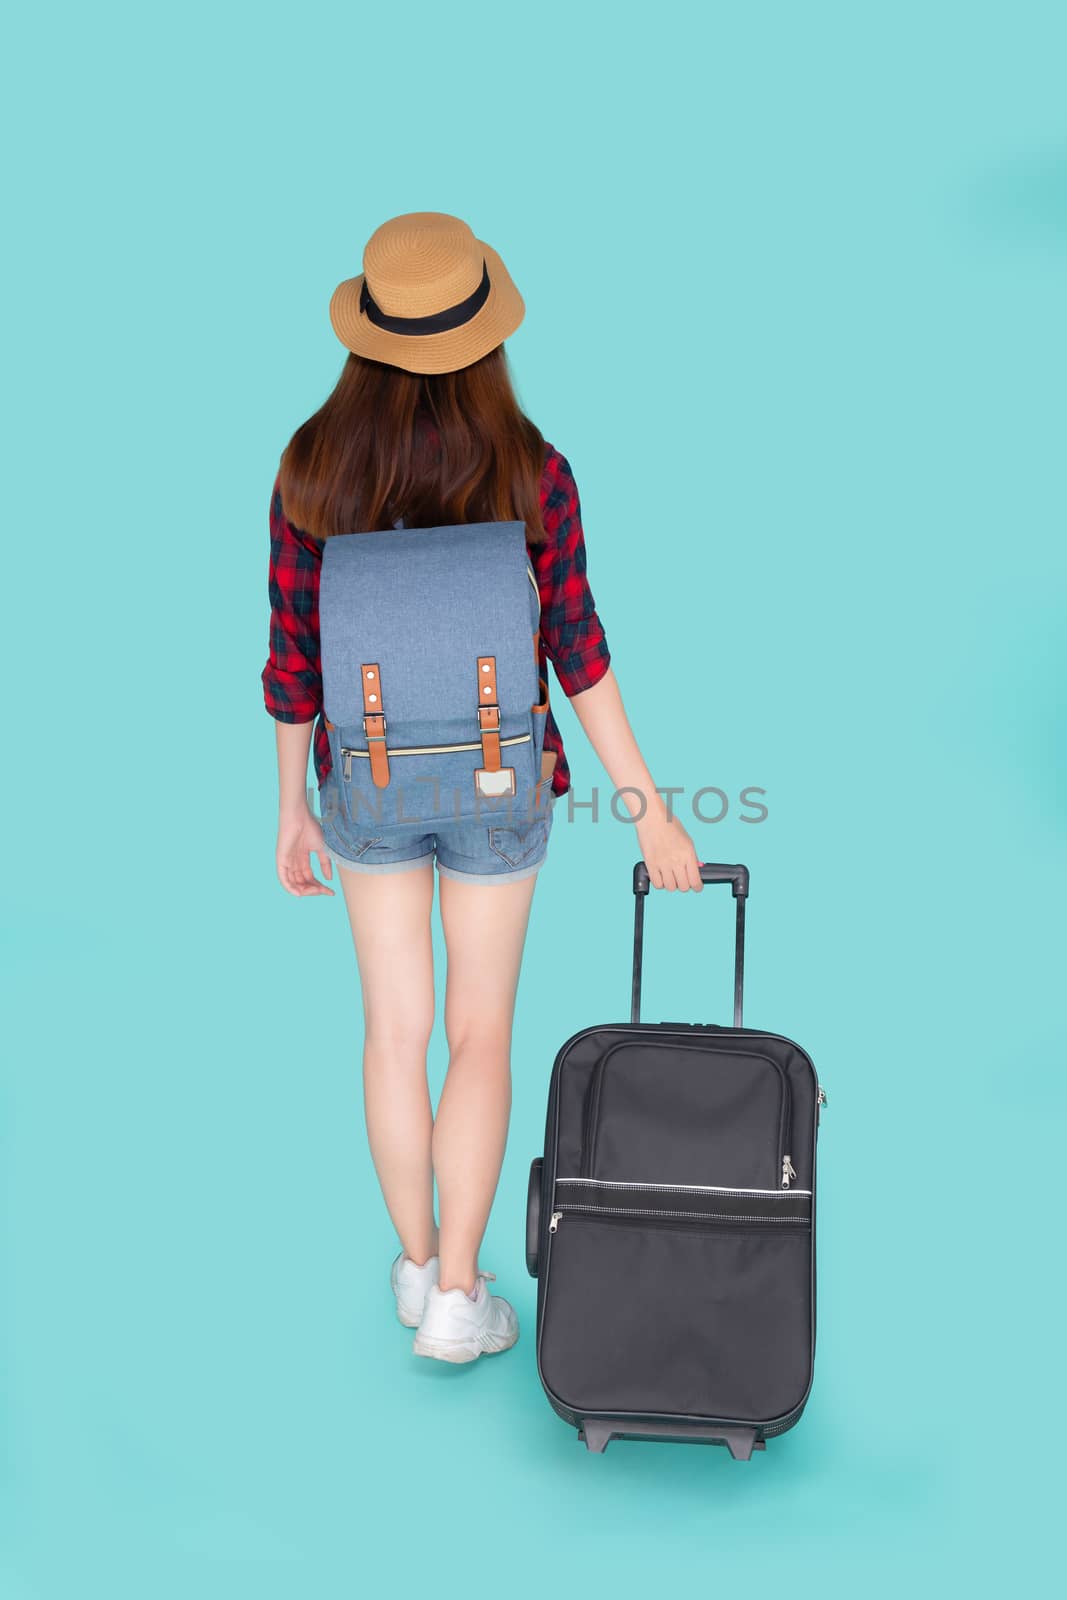 Back view beautiful young asian woman pulling suitcase isolated on blue background, asia girl having expression is cheerful holding luggage walking in vacation with excited, journey and travel concept.